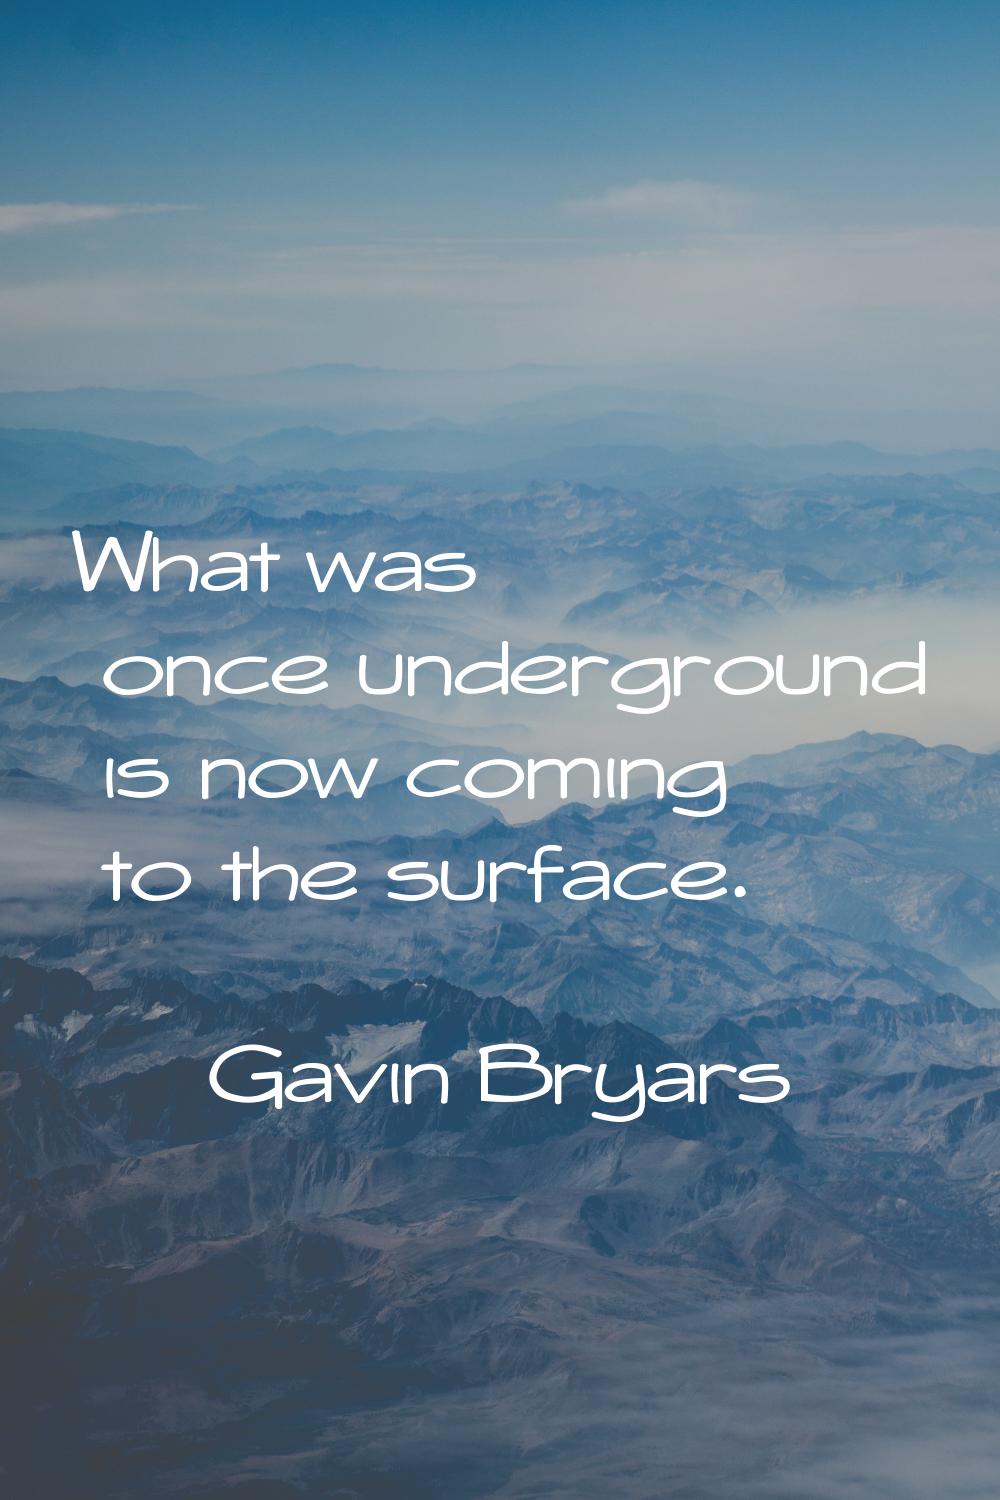 What was once underground is now coming to the surface.